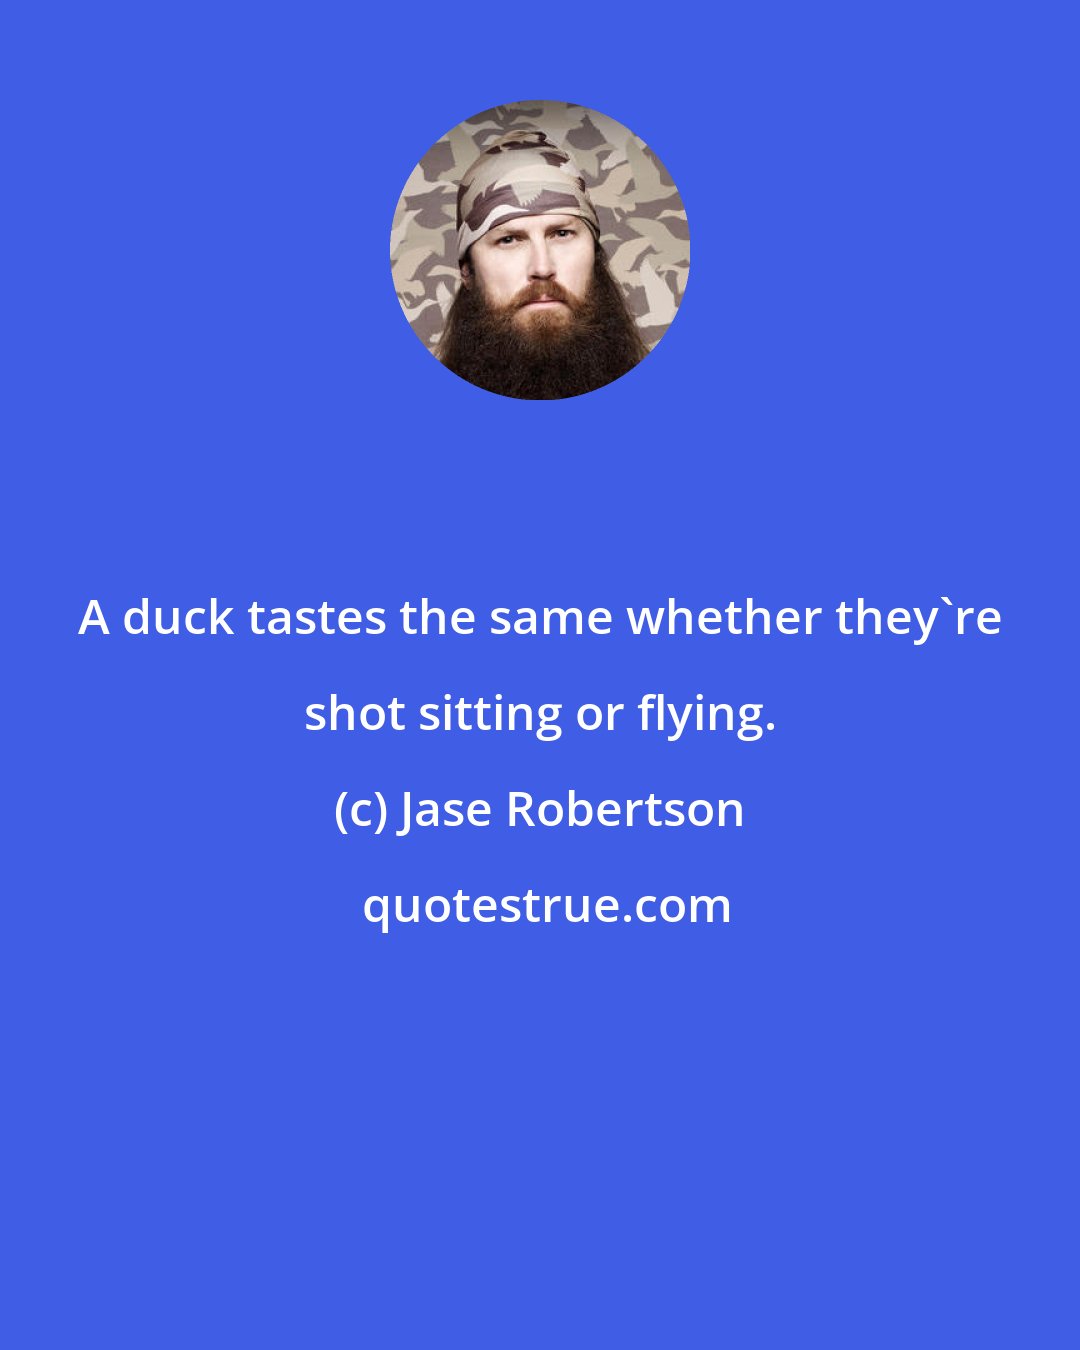 Jase Robertson: A duck tastes the same whether they're shot sitting or flying.